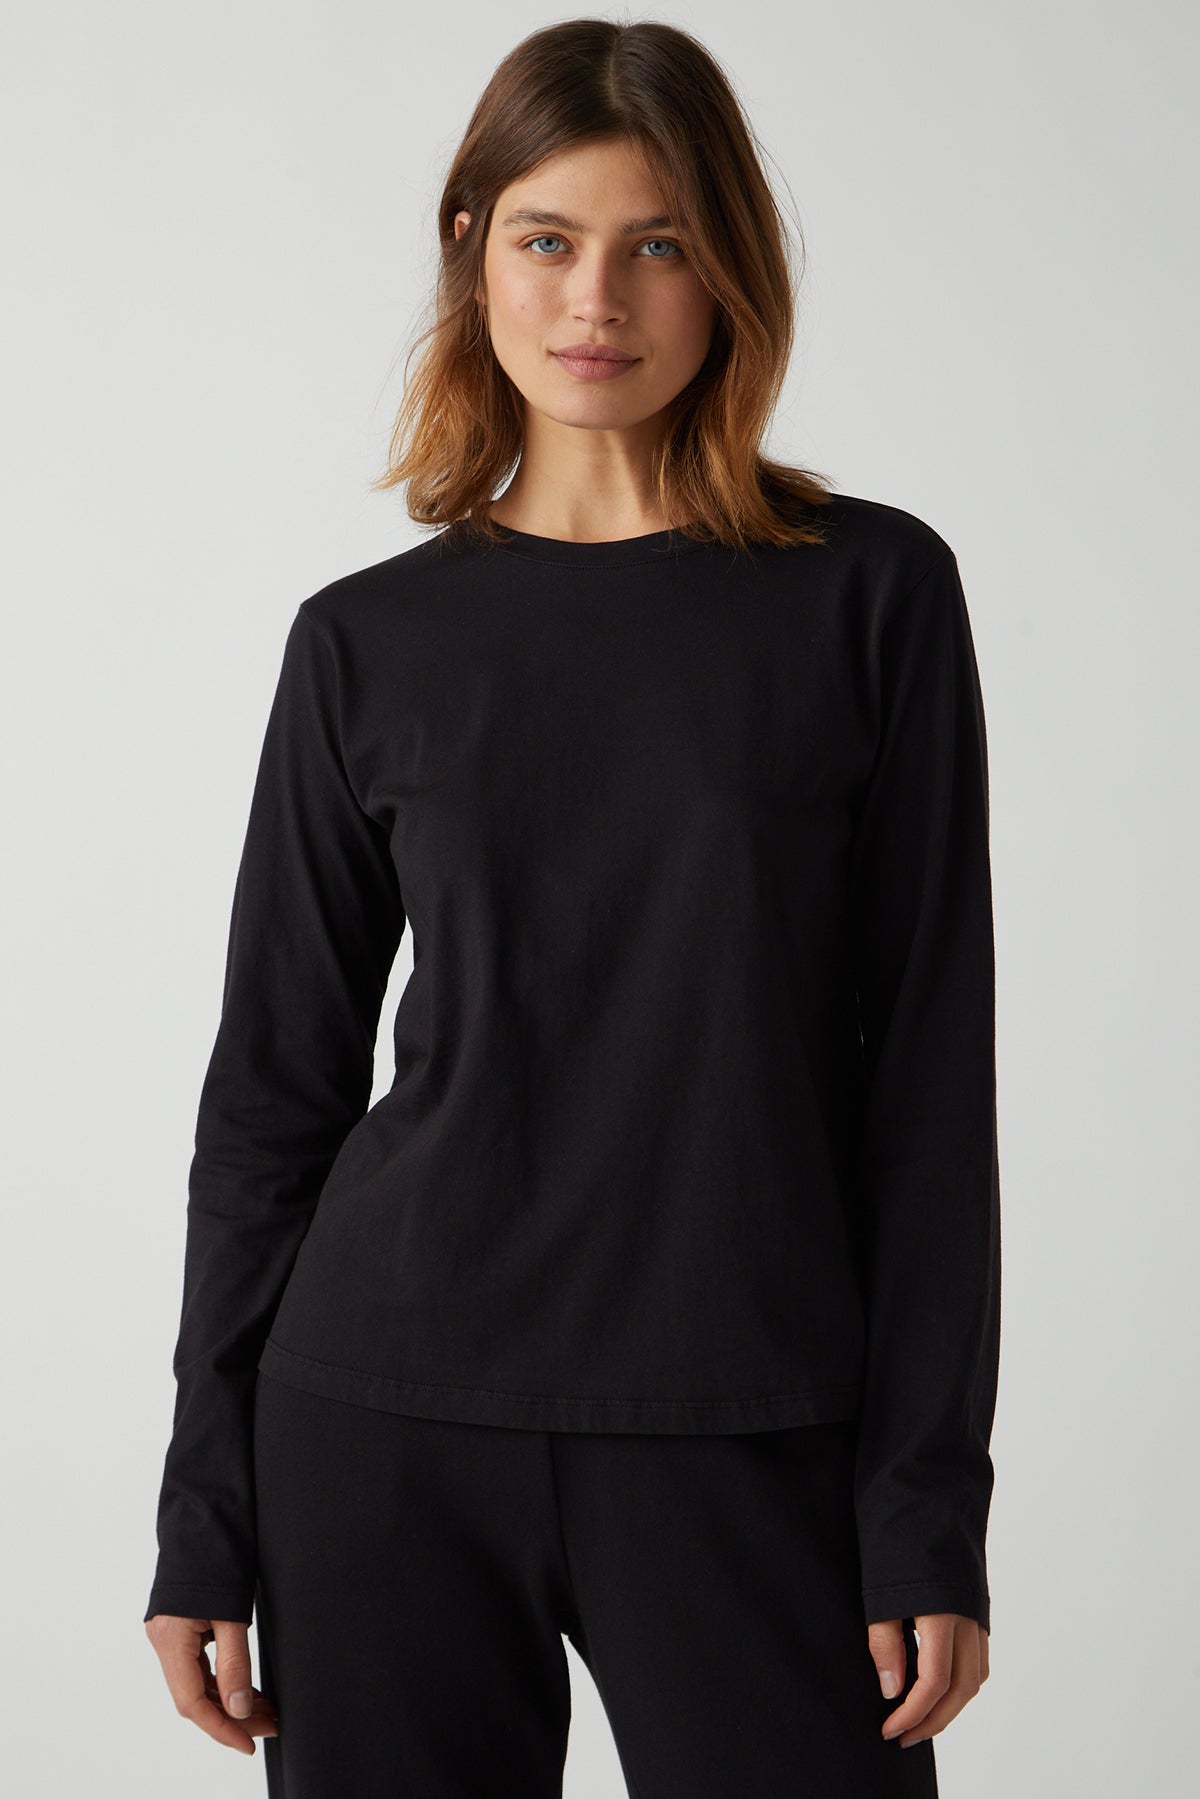 Vicente Tee in black front-25484377161921